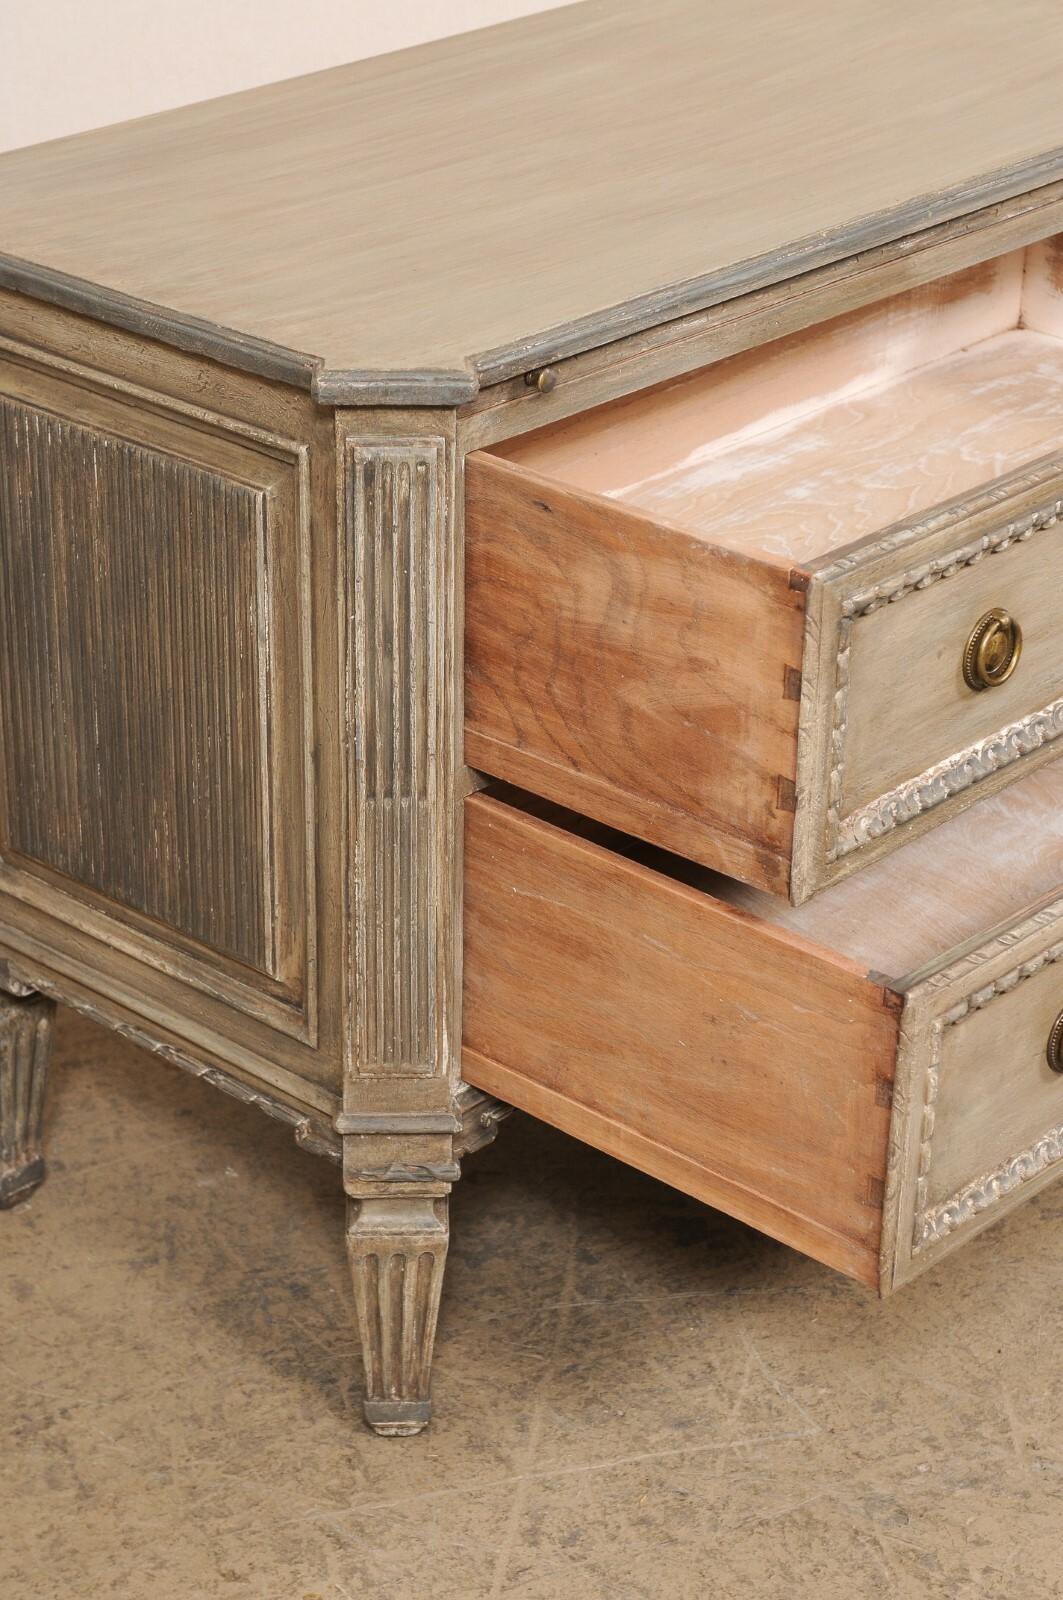 Neoclassical Italian Neoclassic Style Two-Drawer Chest w/Fluted and Wreath Carved Accents For Sale